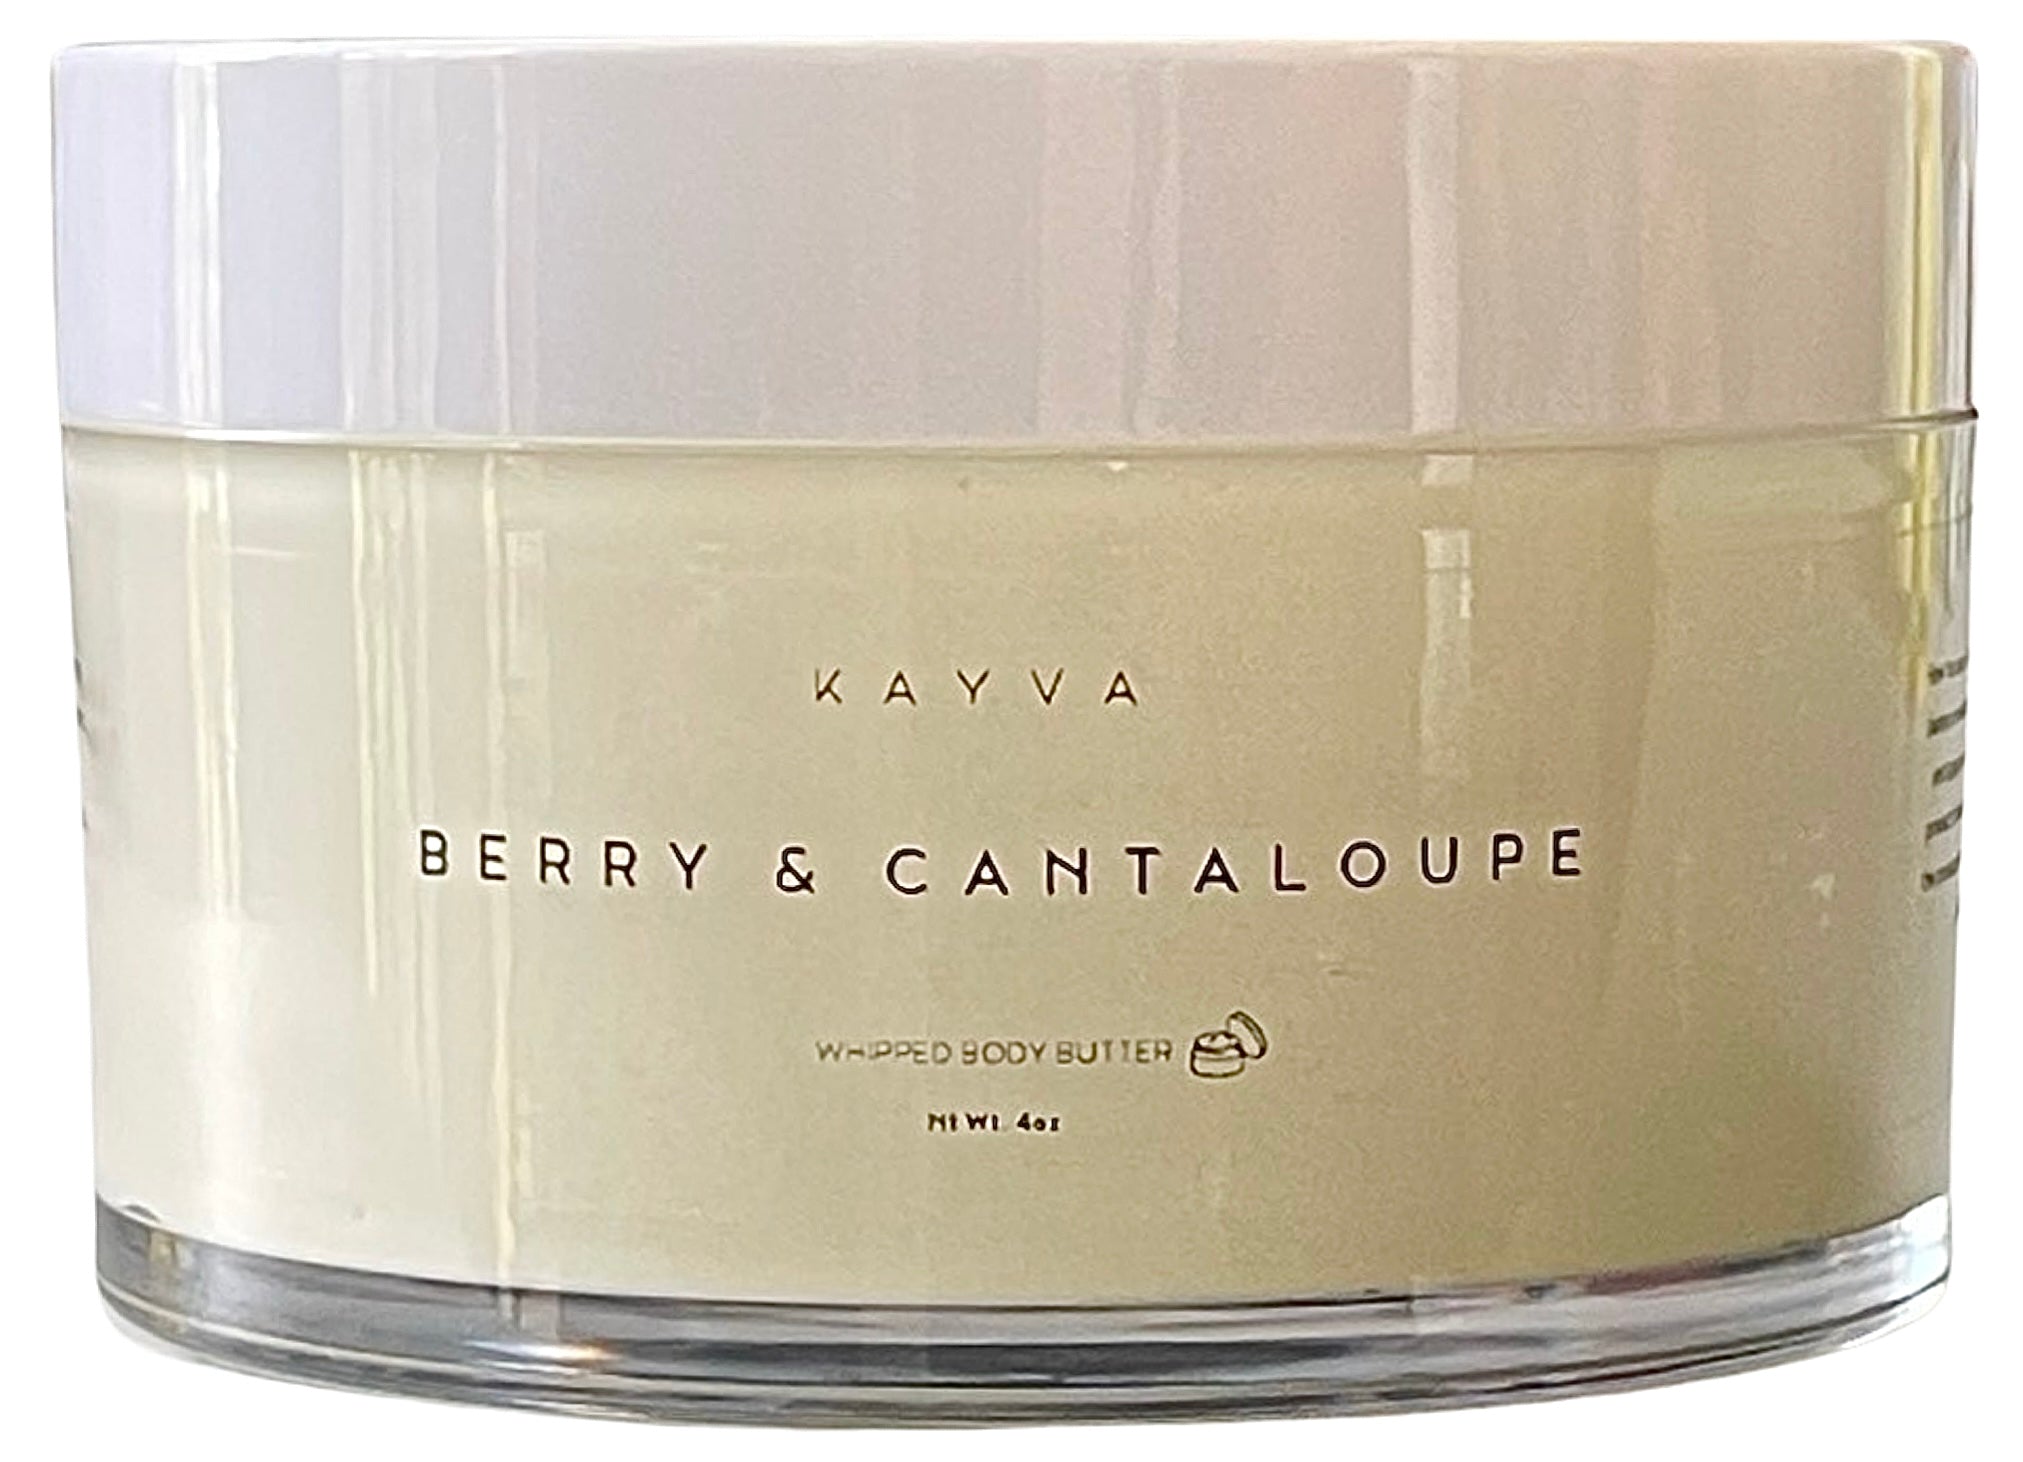 Berry & Cantaloupe Whipped Body Butter